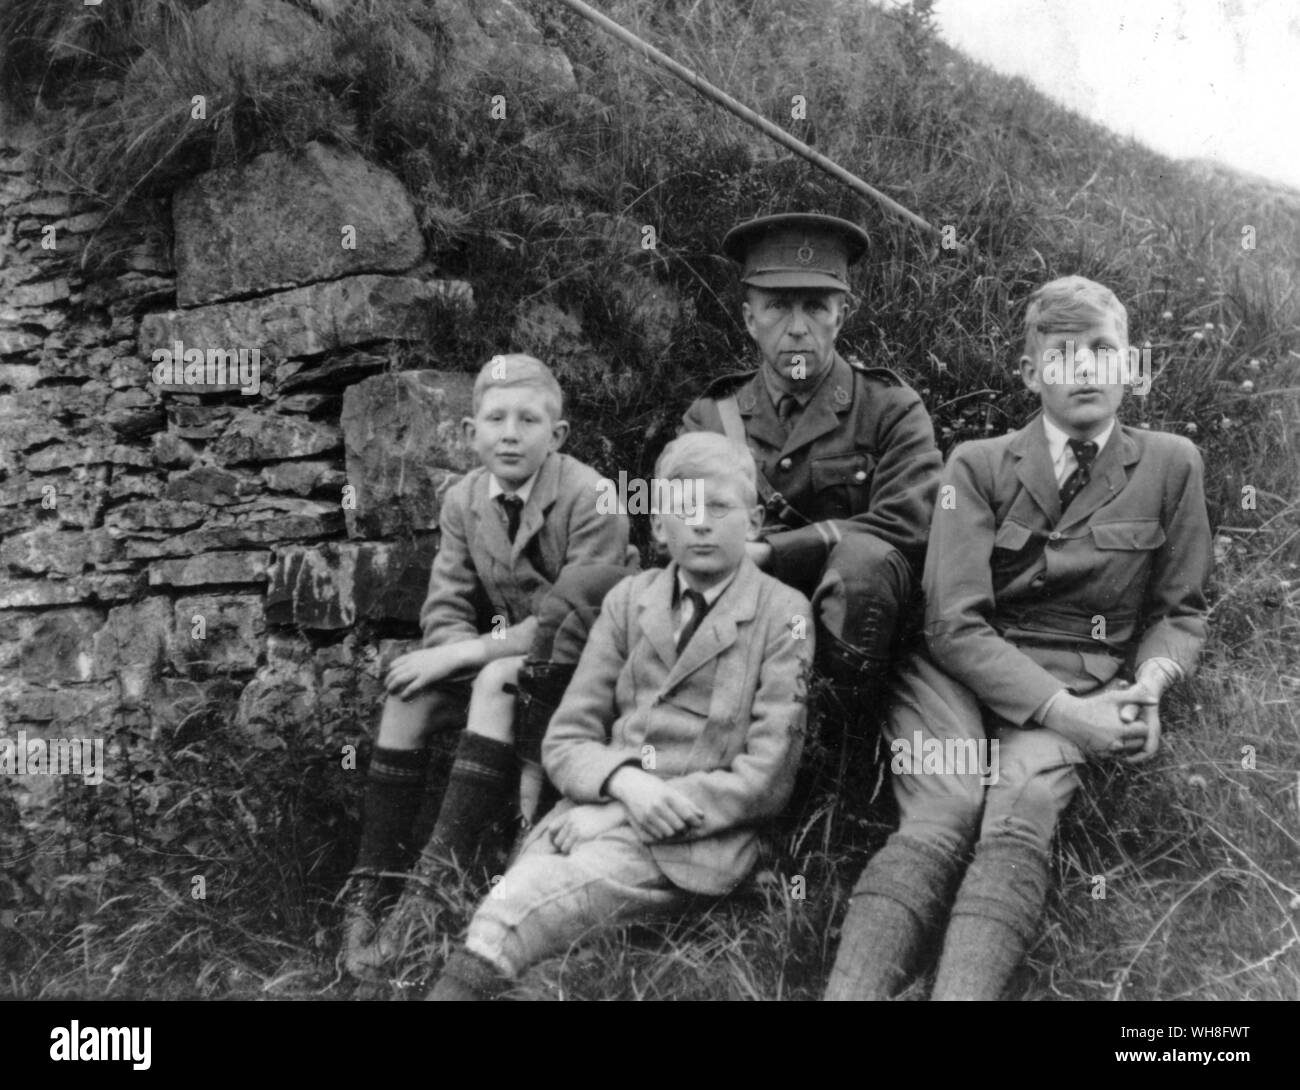 The Auden brothers on holiday in Rhayader, Wales, during World War One. W H Auden, The Life of a Poet, by Charles Osborne.. Stock Photo